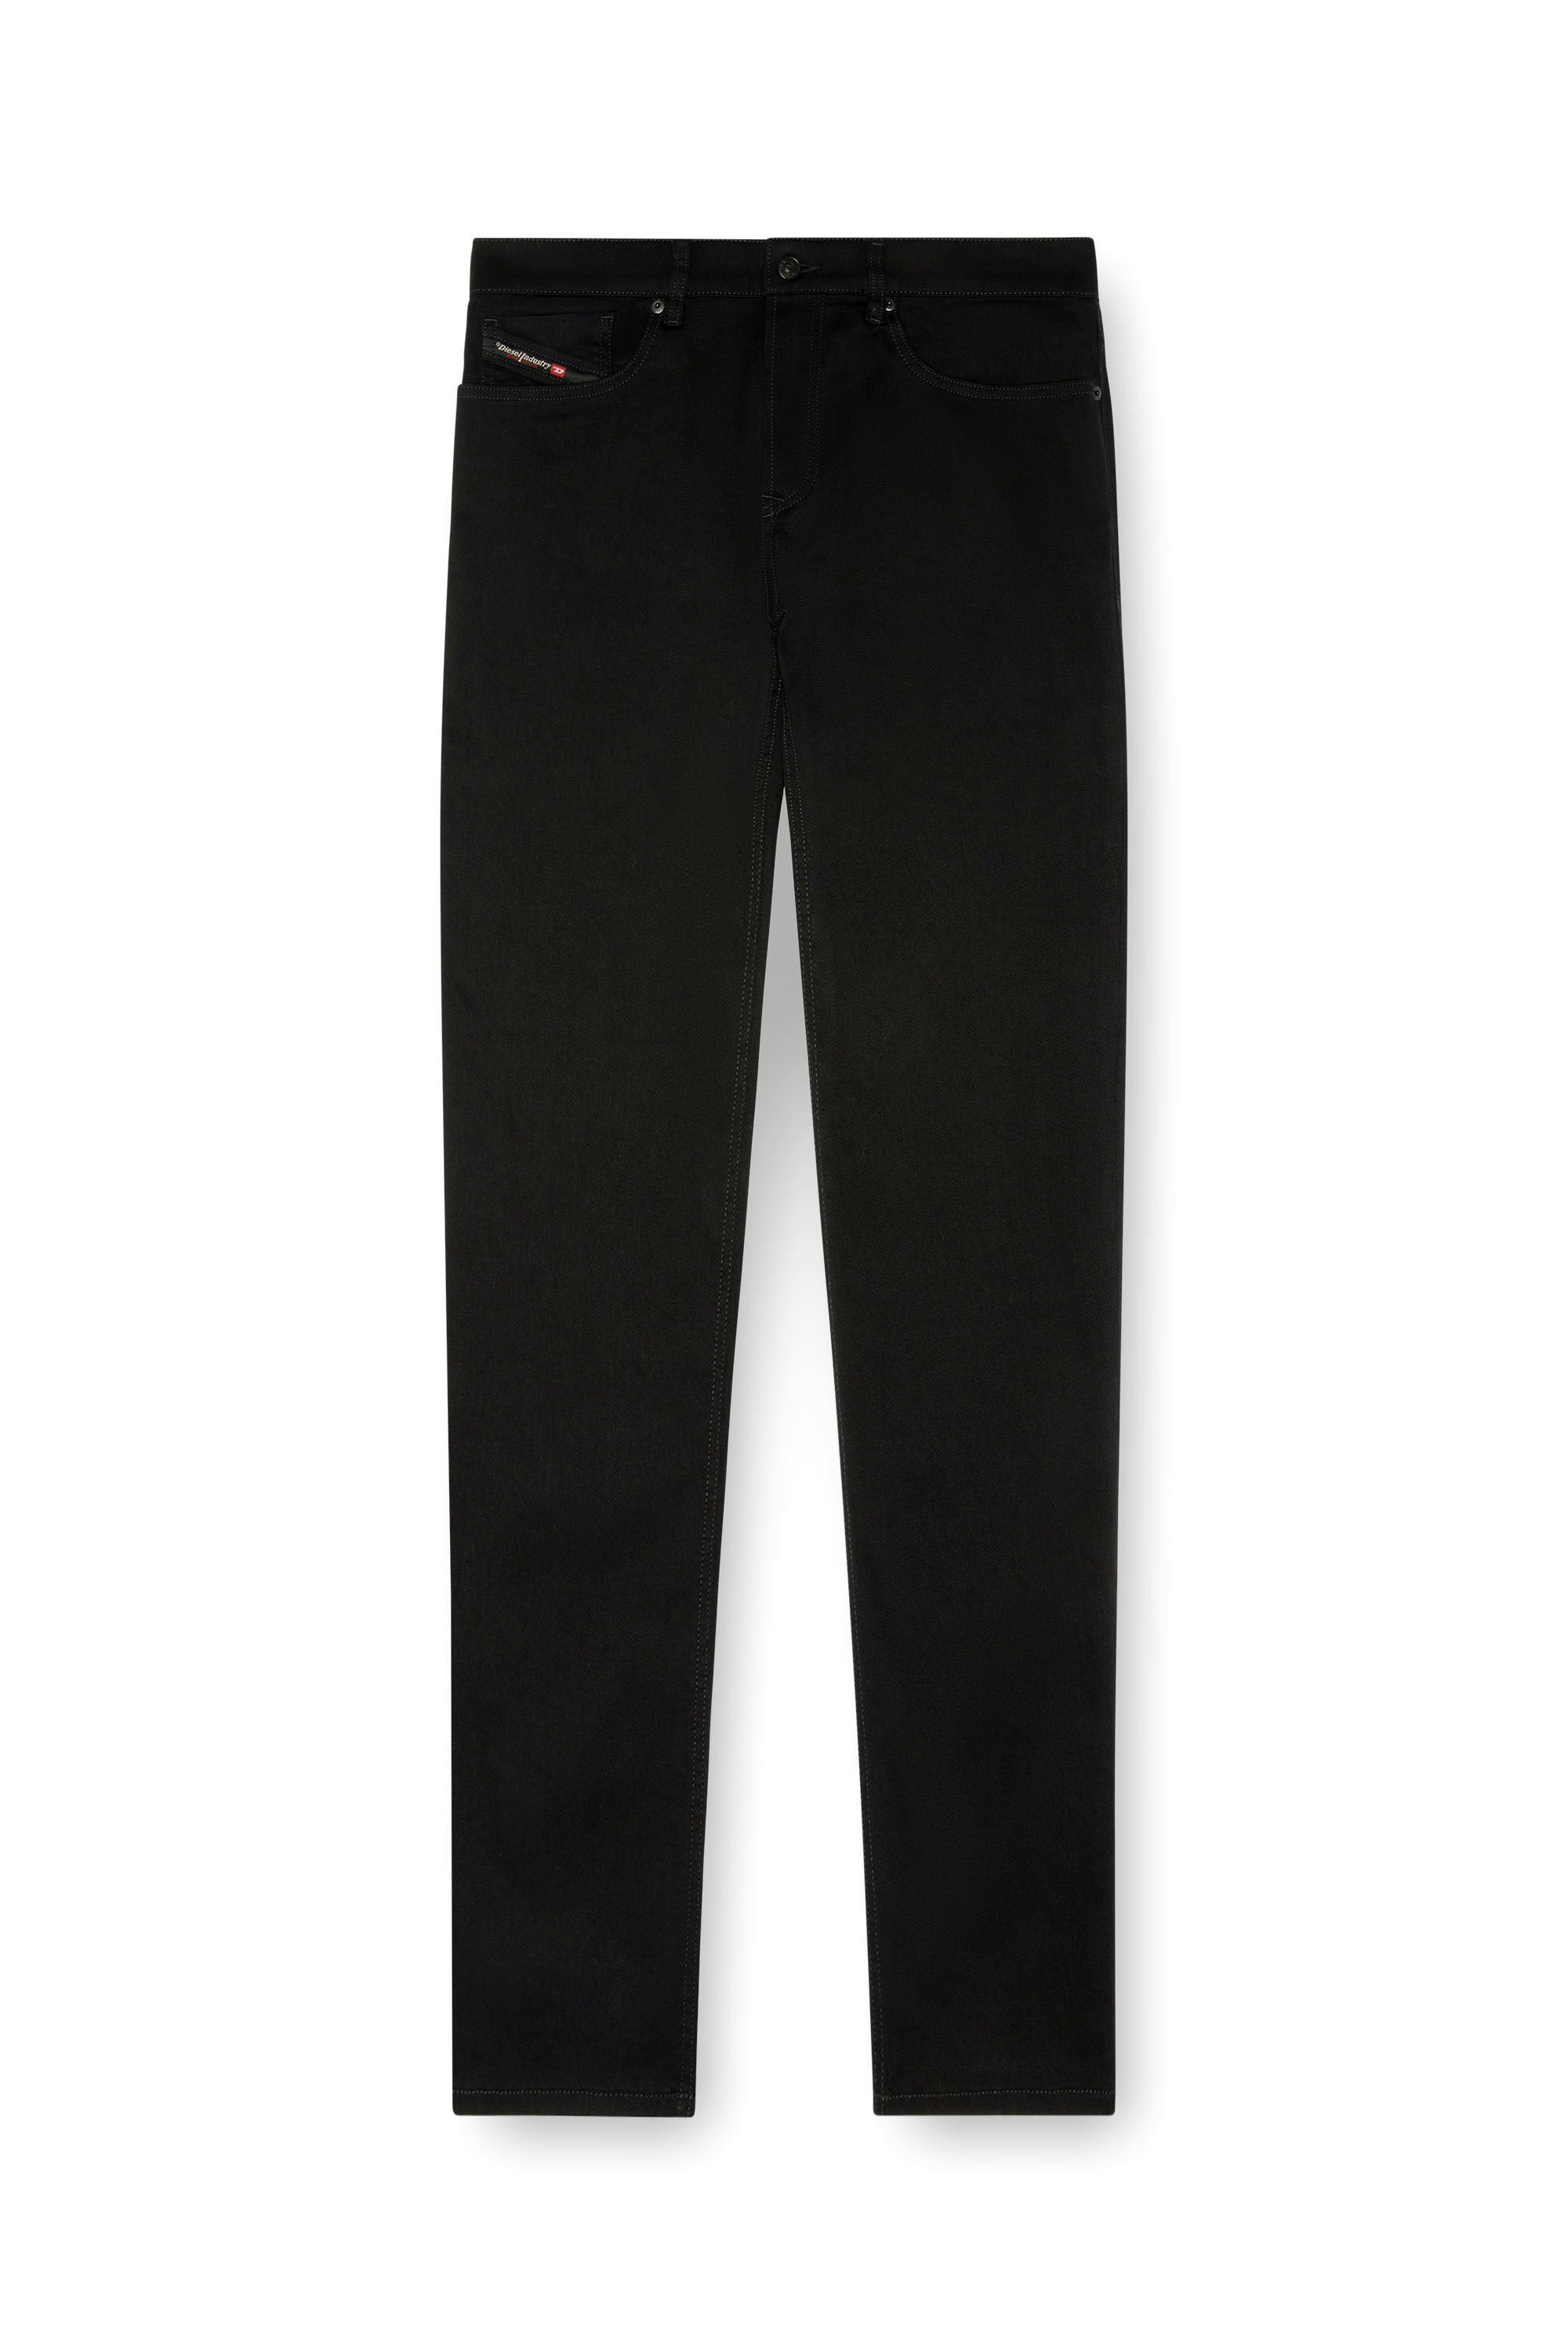 Diesel - Tapered Jeans 2023 D-Finitive 069YP, Hombre Tapered Jeans - 2023 D-Finitive in Negro - Image 2